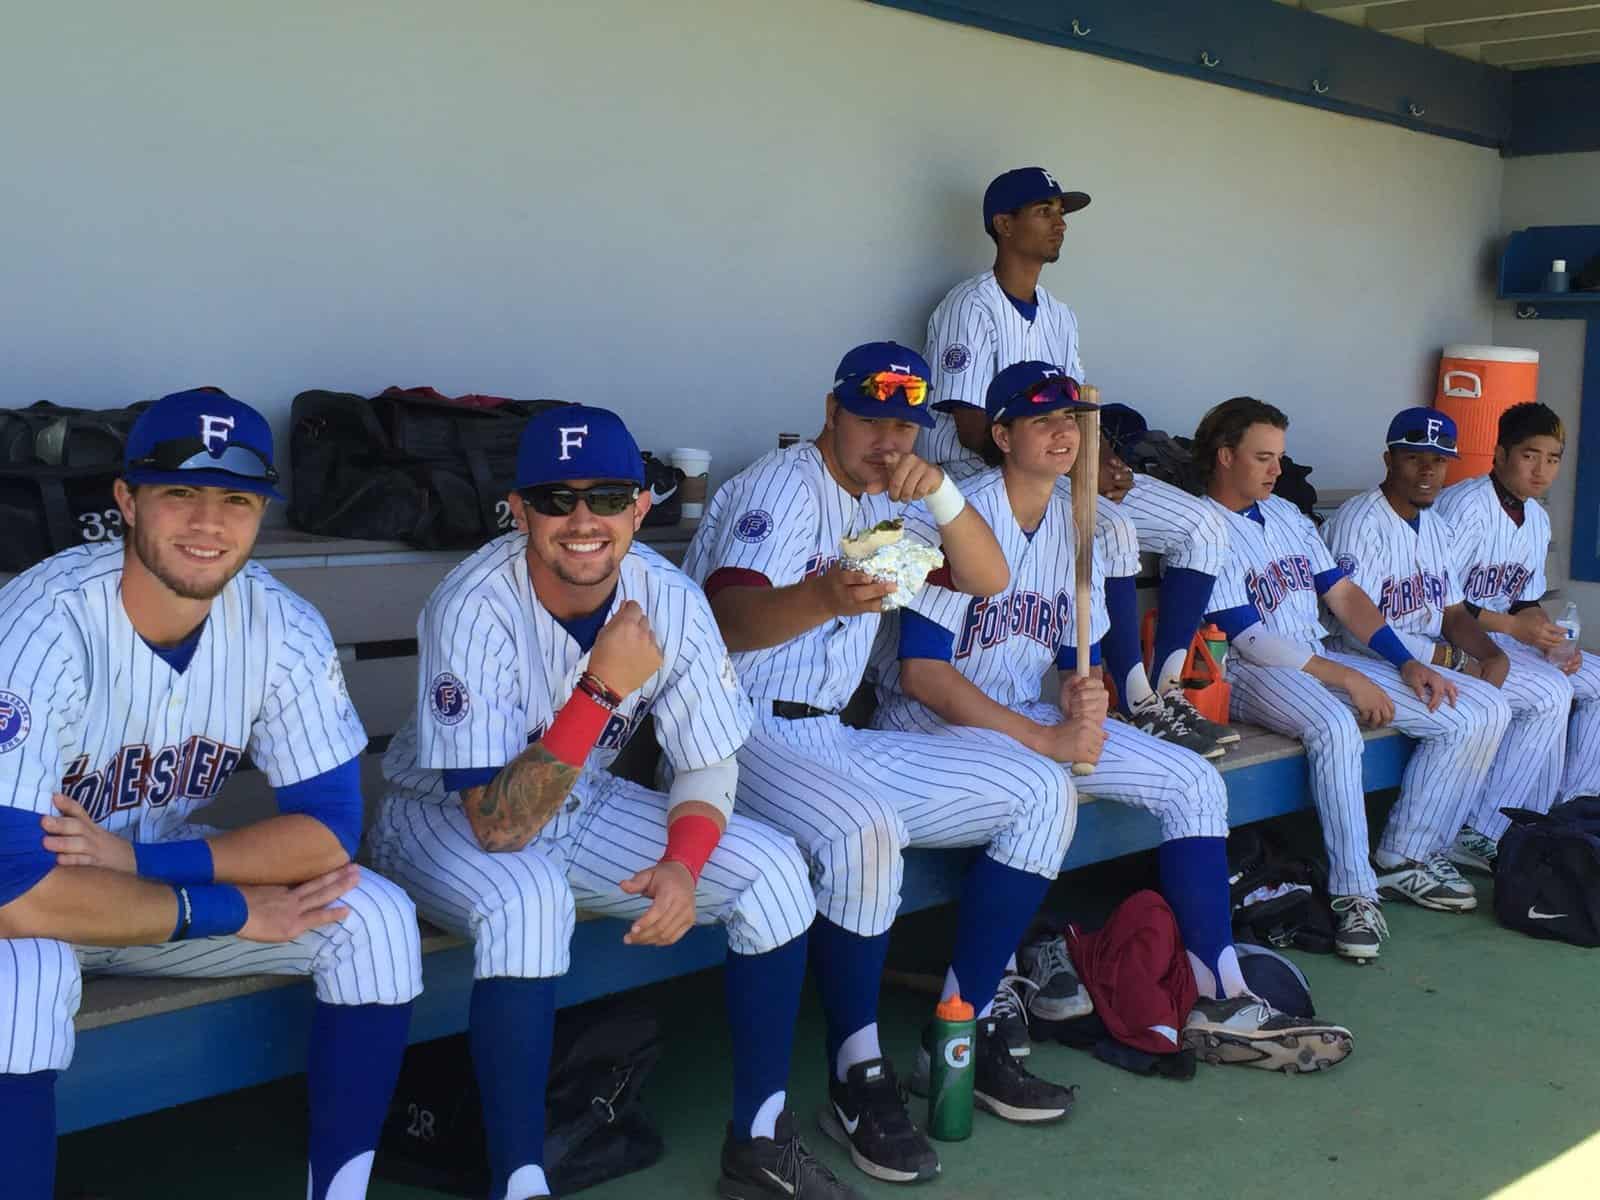 Players in dugout